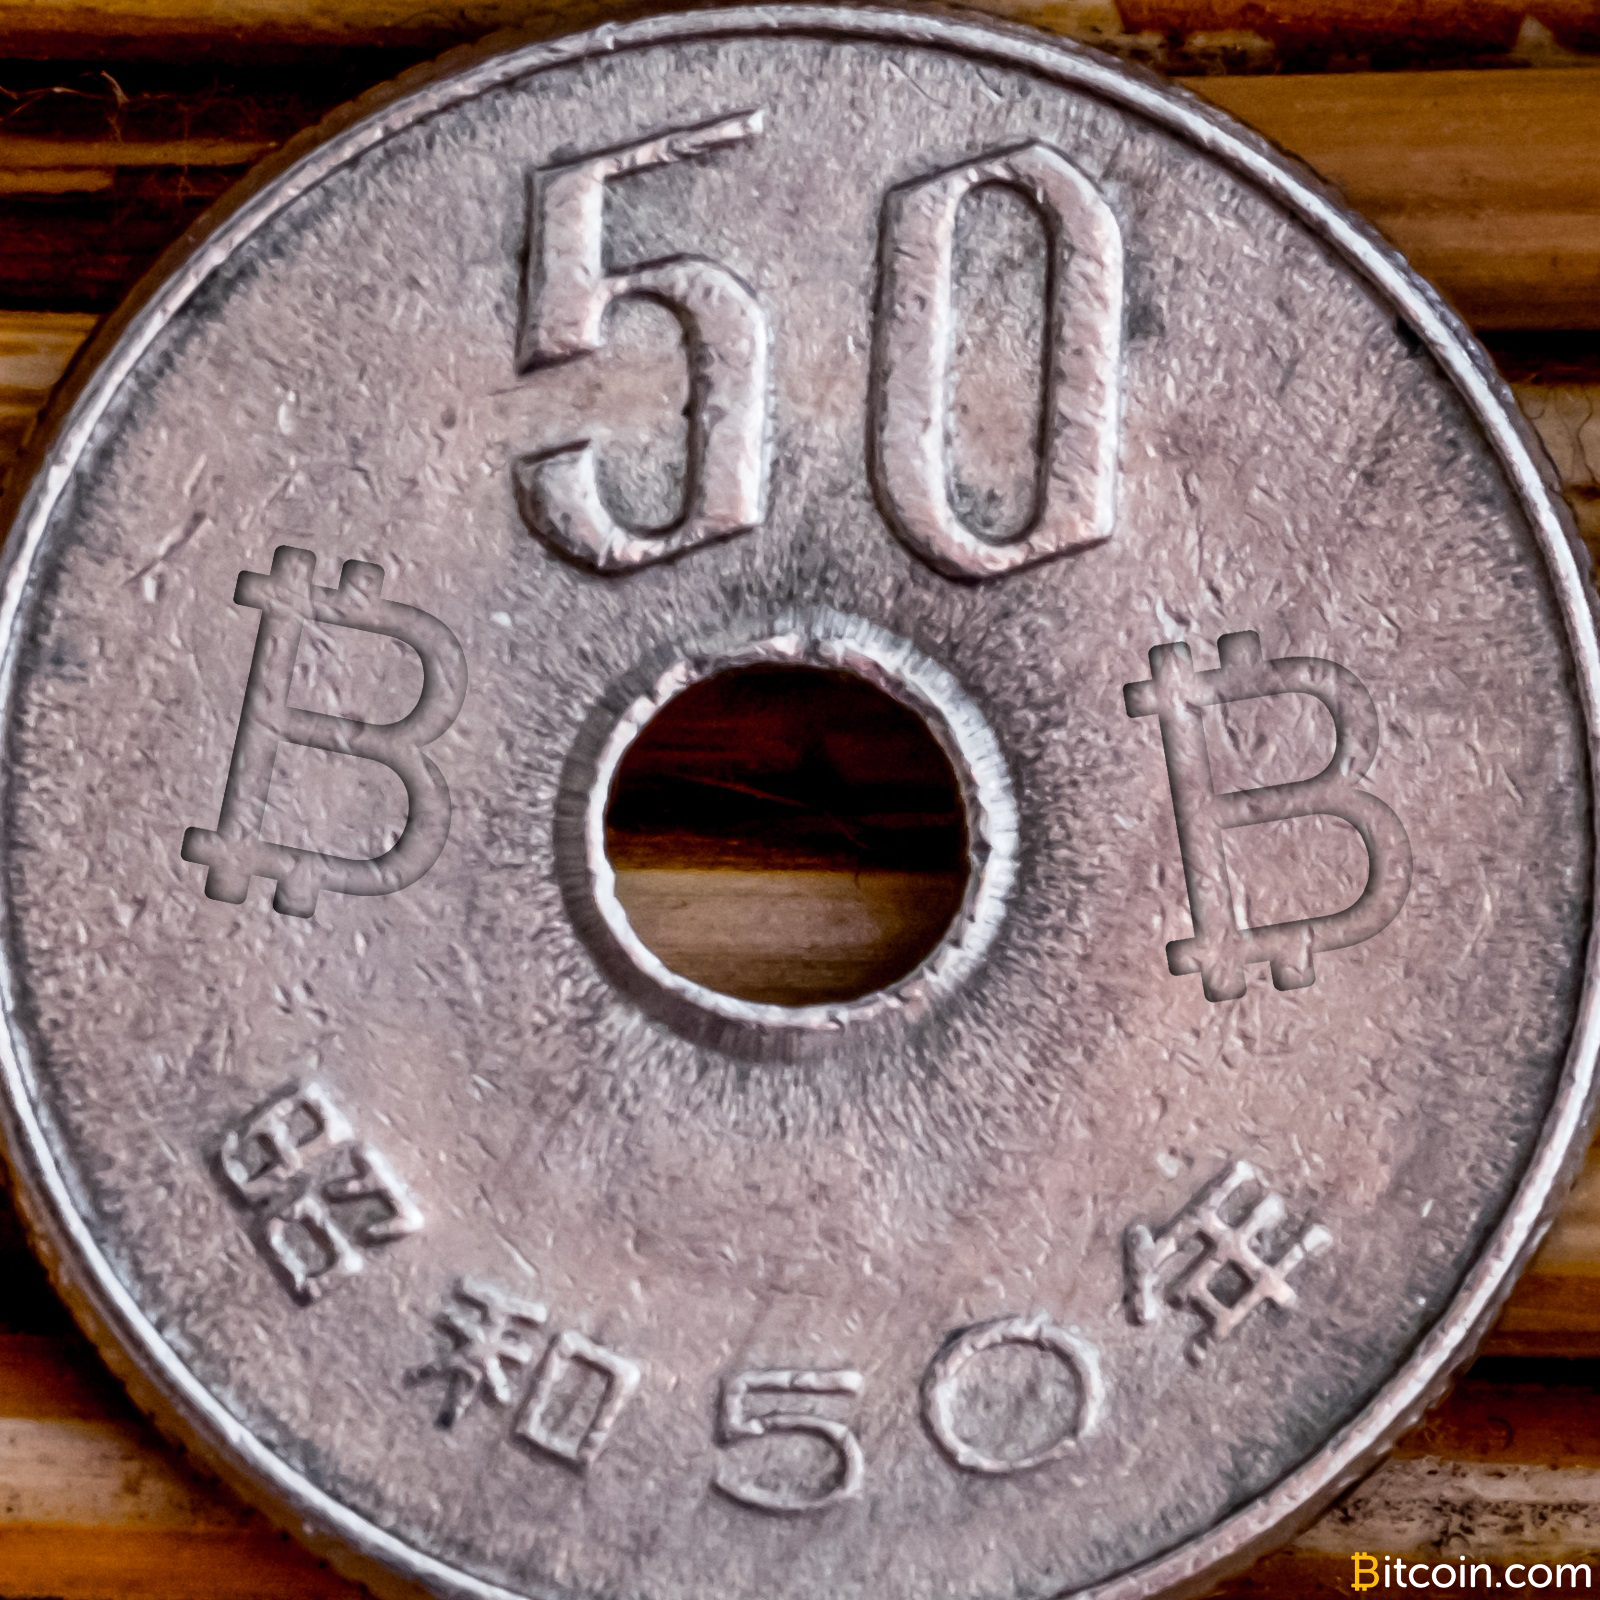 50 Bitcoin Exchanges Have Filed with the Japanese Financial Authority